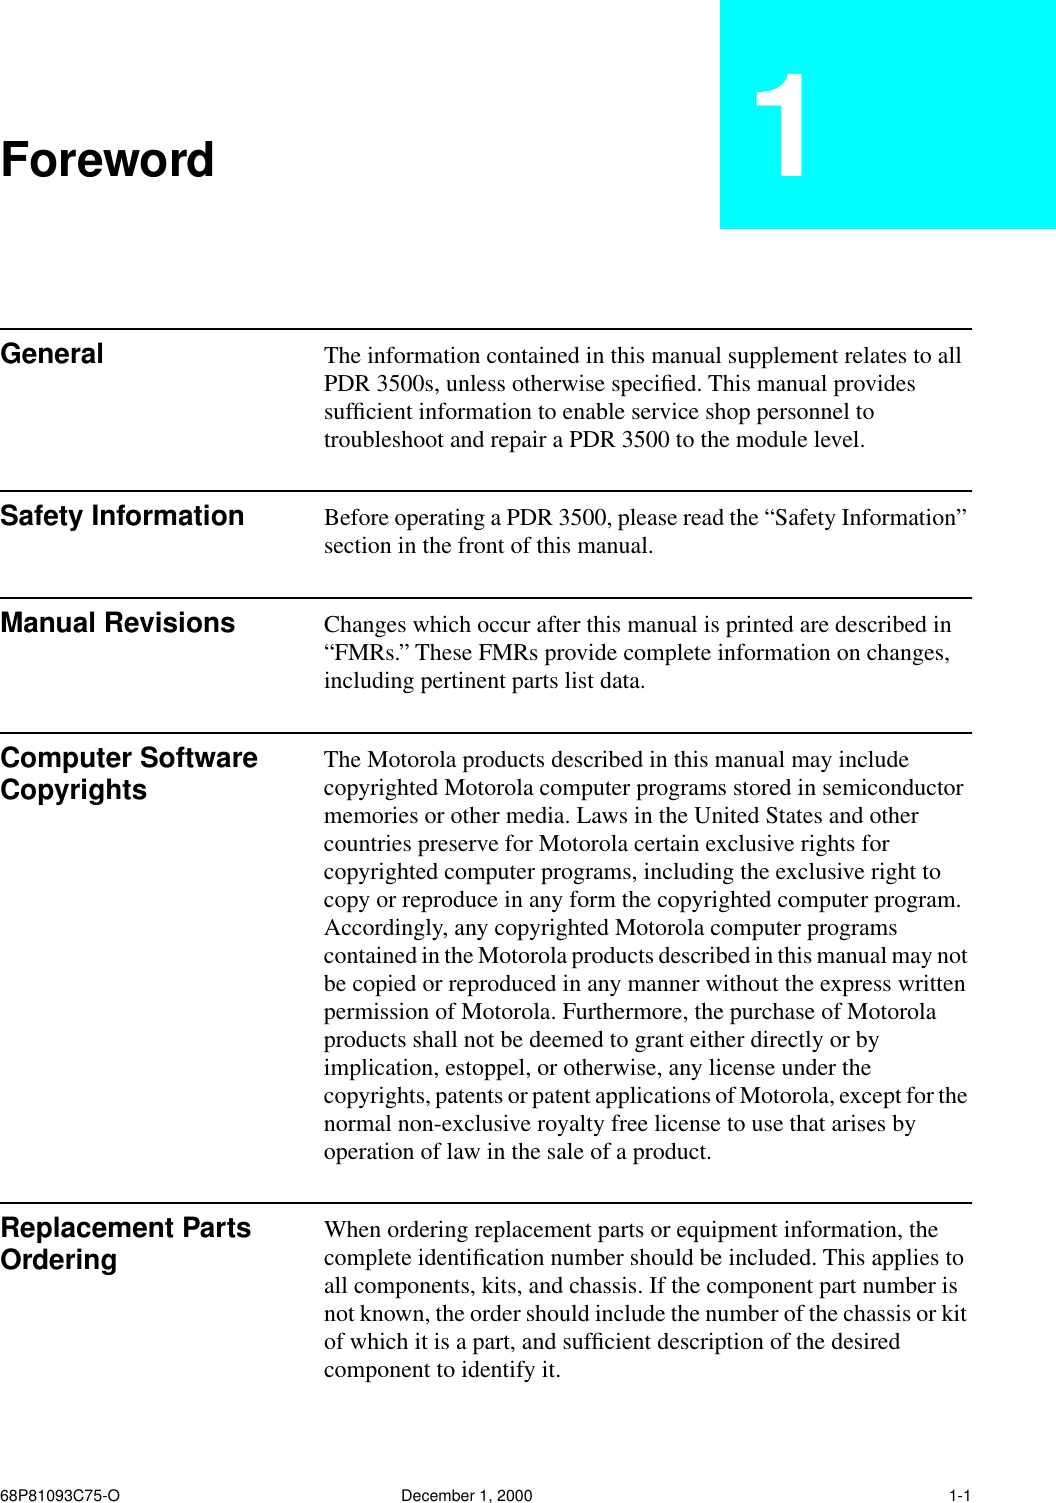  68P81093C75-O December 1, 2000 1-1 Foreword 1 General The information contained in this manual supplement relates to all PDR 3500s, unless otherwise speciﬁed. This manual provides sufﬁcient information to enable service shop personnel to troubleshoot and repair a PDR 3500 to the module level. Safety Information Before operating a PDR 3500, please read the “Safety Information” section in the front of this manual. Manual Revisions Changes which occur after this manual is printed are described in “FMRs.” These FMRs provide complete information on changes, including pertinent parts list data. Computer Software Copyrights The Motorola products described in this manual may include copyrighted Motorola computer programs stored in semiconductor memories or other media. Laws in the United States and other countries preserve for Motorola certain exclusive rights for copyrighted computer programs, including the exclusive right to copy or reproduce in any form the copyrighted computer program. Accordingly, any copyrighted Motorola computer programs contained in the Motorola products described in this manual may not be copied or reproduced in any manner without the express written permission of Motorola. Furthermore, the purchase of Motorola products shall not be deemed to grant either directly or by implication, estoppel, or otherwise, any license under the copyrights, patents or patent applications of Motorola, except for the normal non-exclusive royalty free license to use that arises by operation of law in the sale of a product. Replacement Parts Ordering  When ordering replacement parts or equipment information, the complete identiﬁcation number should be included. This applies to all components, kits, and chassis. If the component part number is not known, the order should include the number of the chassis or kit of which it is a part, and sufﬁcient description of the desired component to identify it.